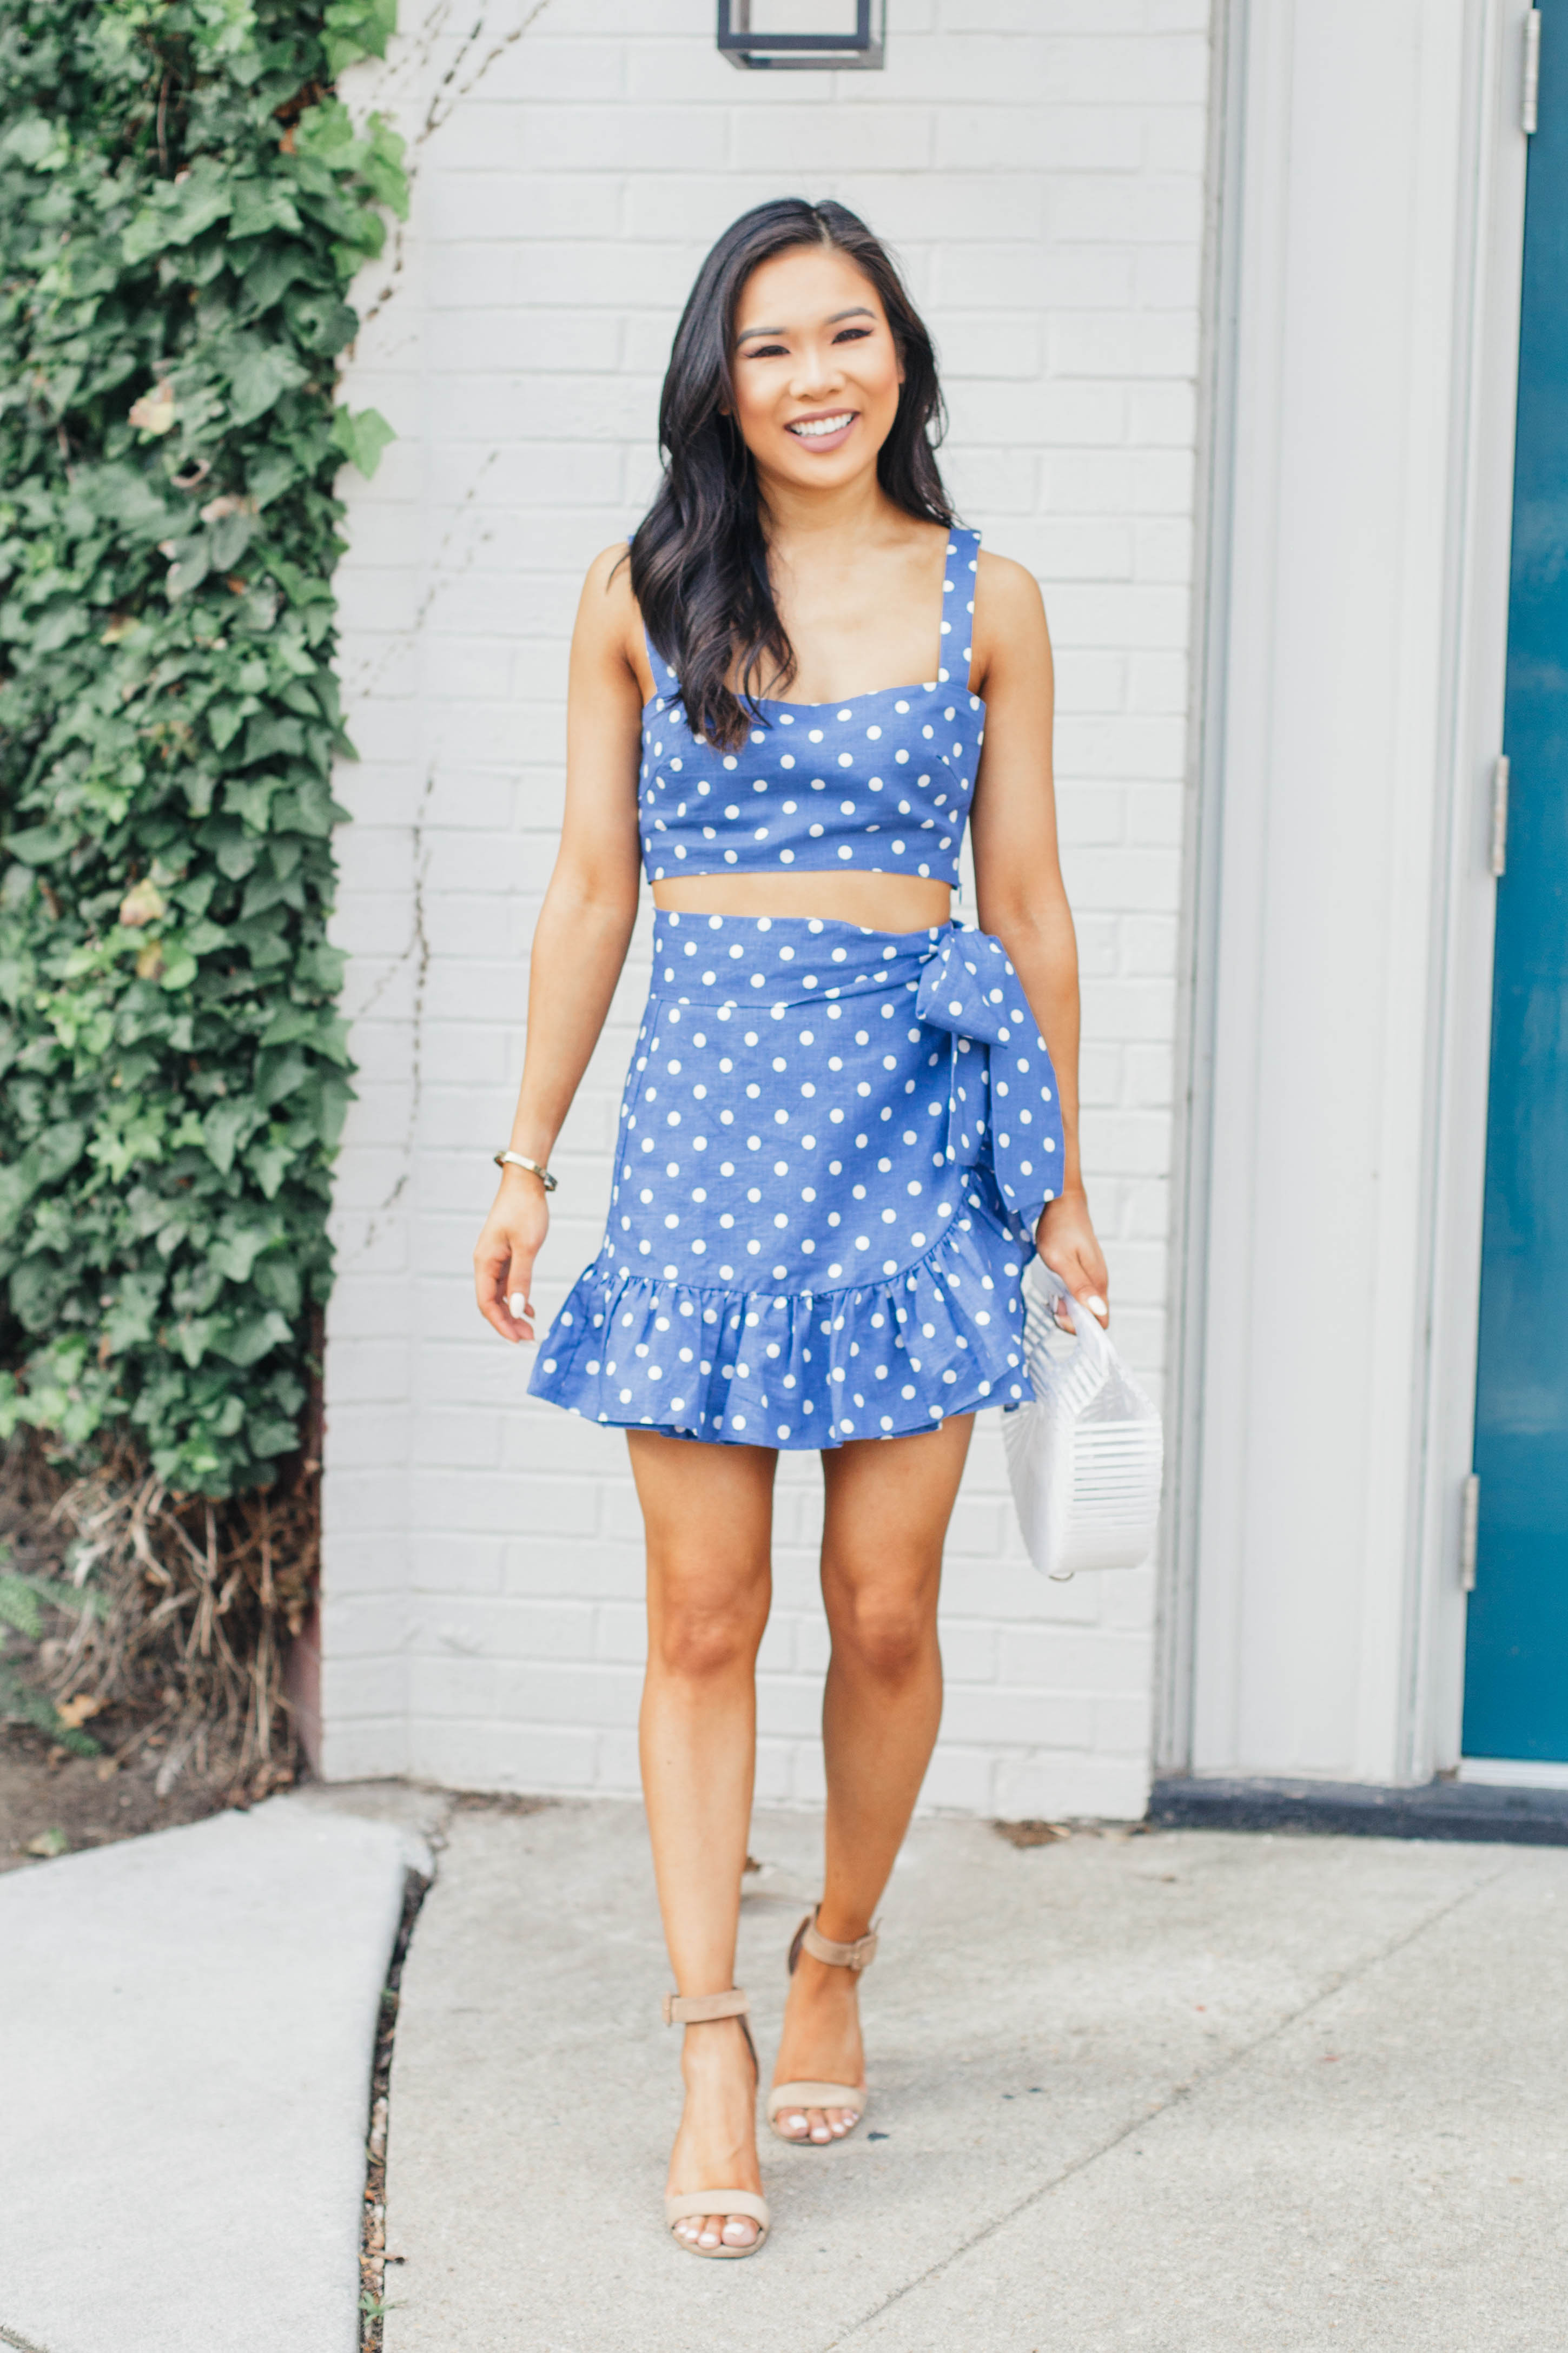 Sumer outfit idea: Blue polka-dot two piece set with white acrylic bag and suede sandals